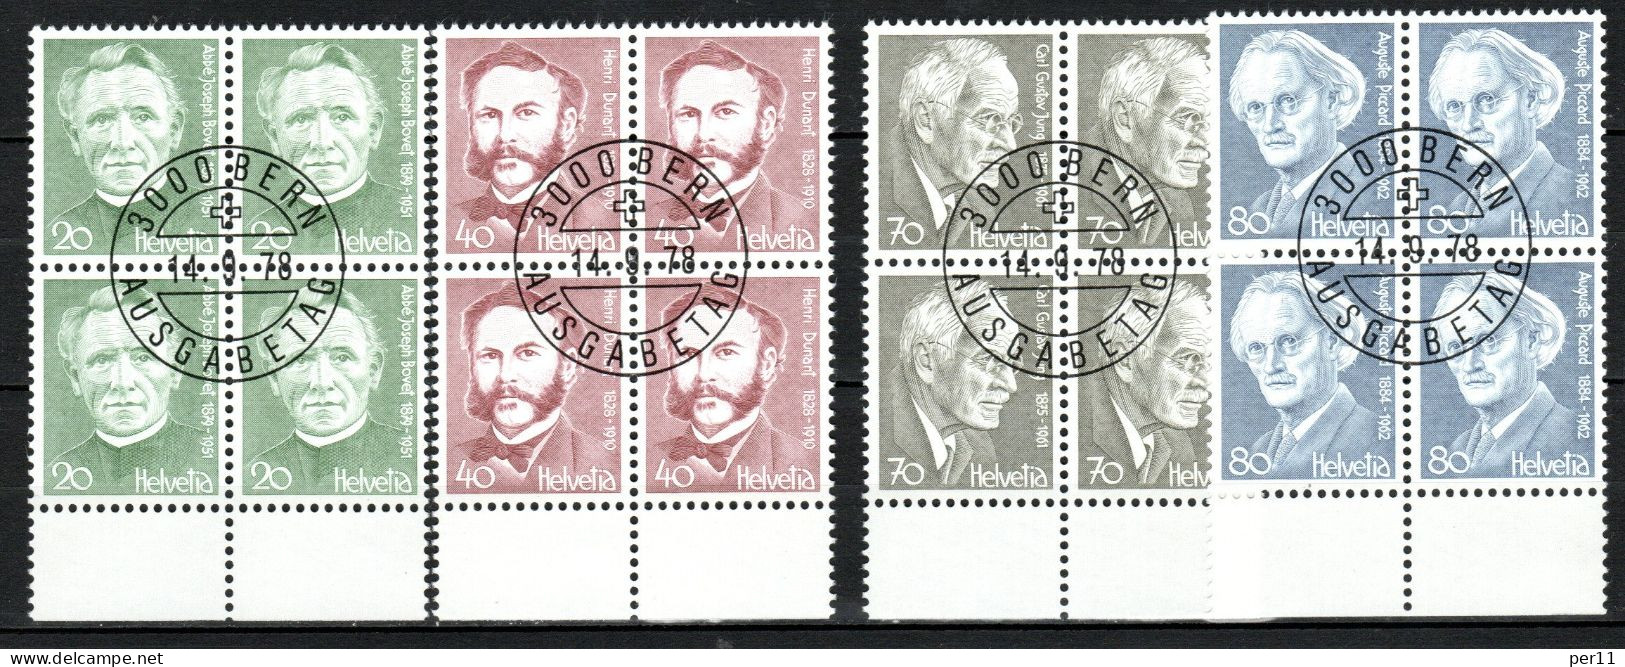 1978 Famous People 4block Used/gest.  (ch170) - Used Stamps